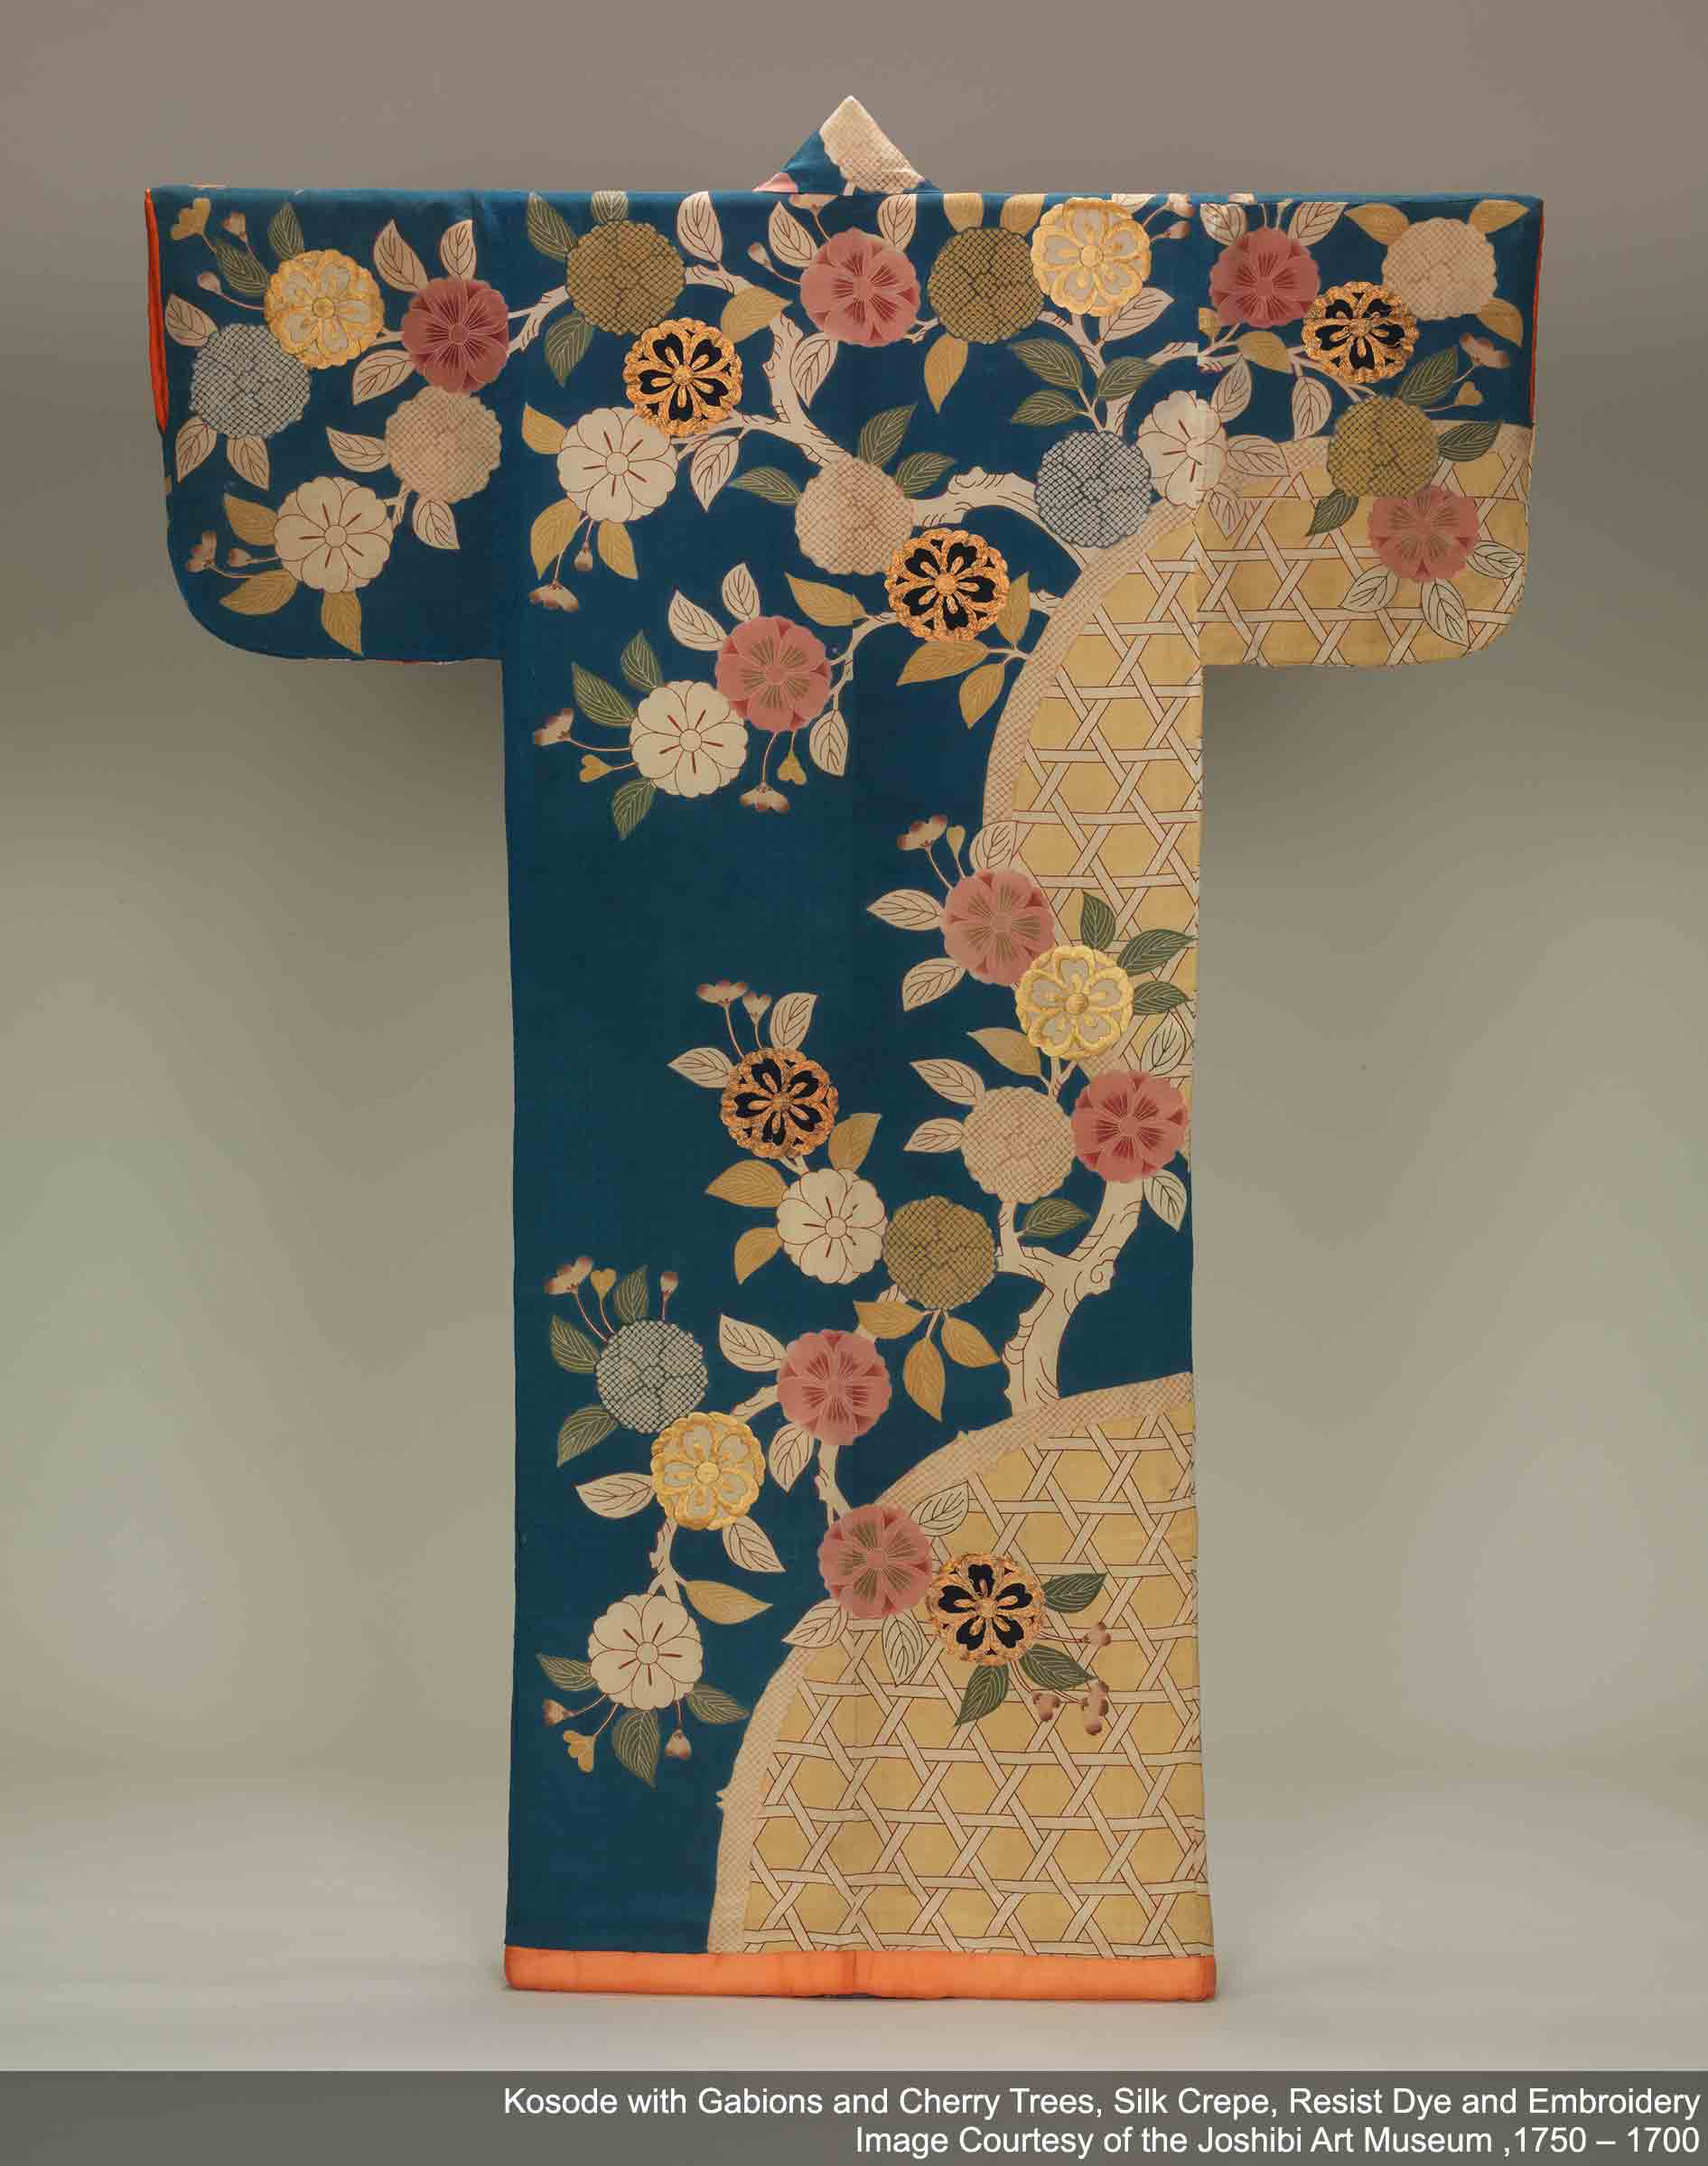 Kimono Exhibition At V&A Museum, London: Info And Guide